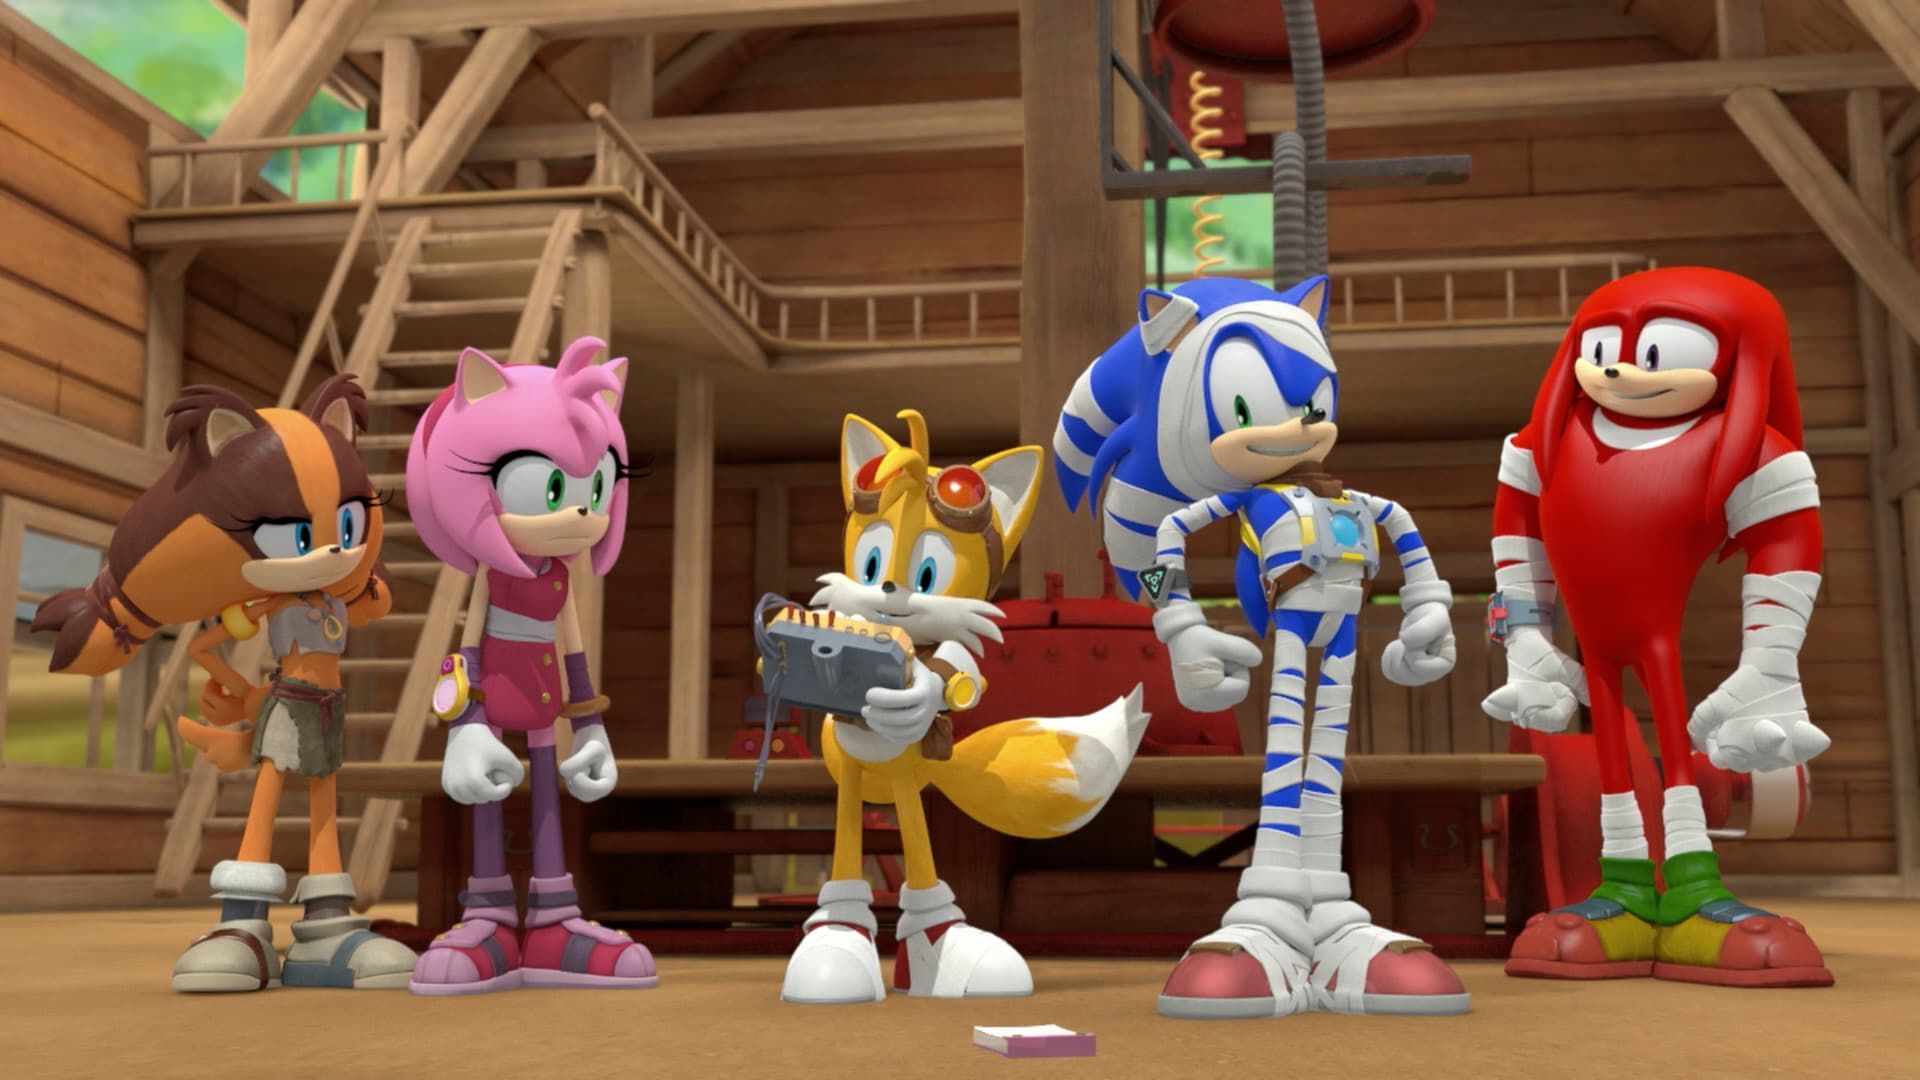 Sonic Boom - watch tv show streaming online